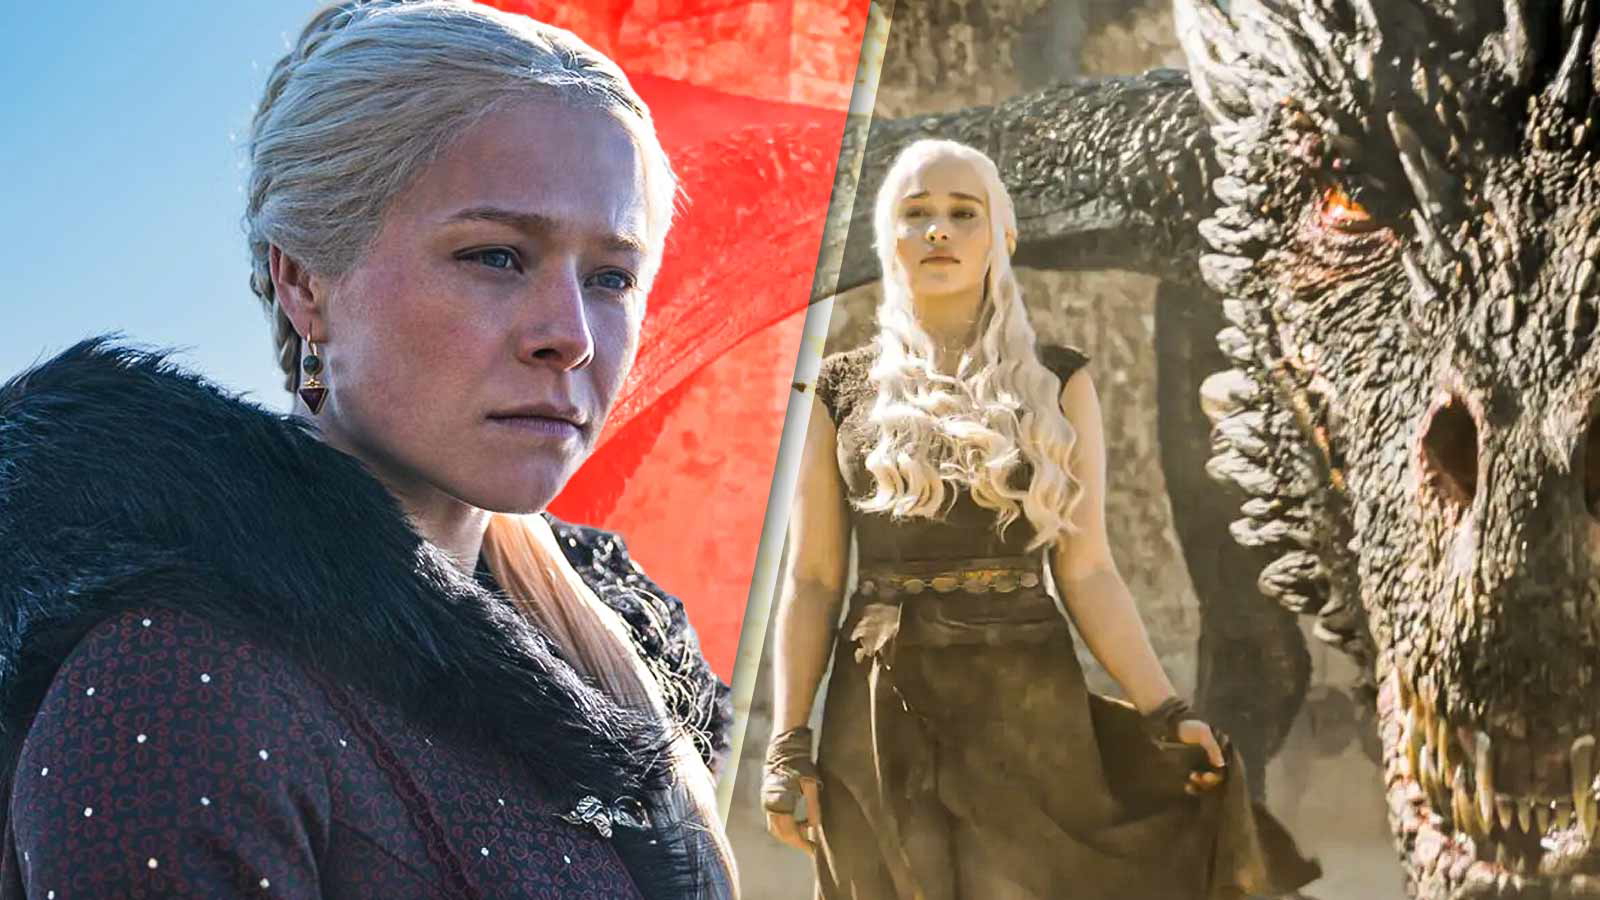 “They’re just going in circles”: House of the Dragon Season 2 Could Doom the Entire Game of Thrones Franchise If It Keeps Making the Same Frustrating Mistake